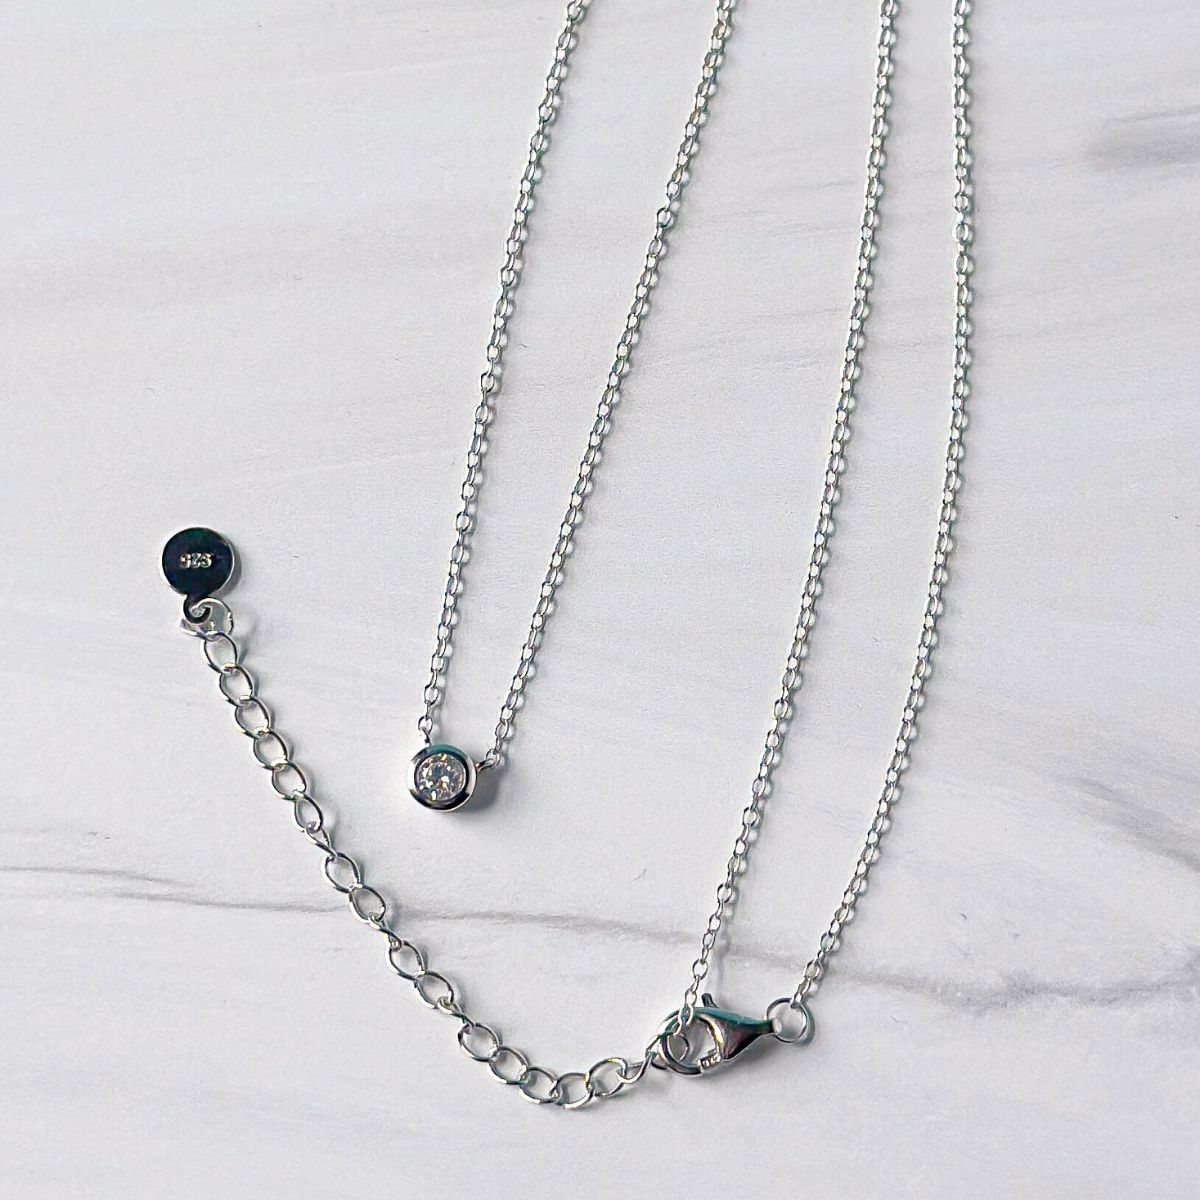  Featherly adjustable cubic zirconia bezel necklace in 925 sterling silver showing the 2 inch extender